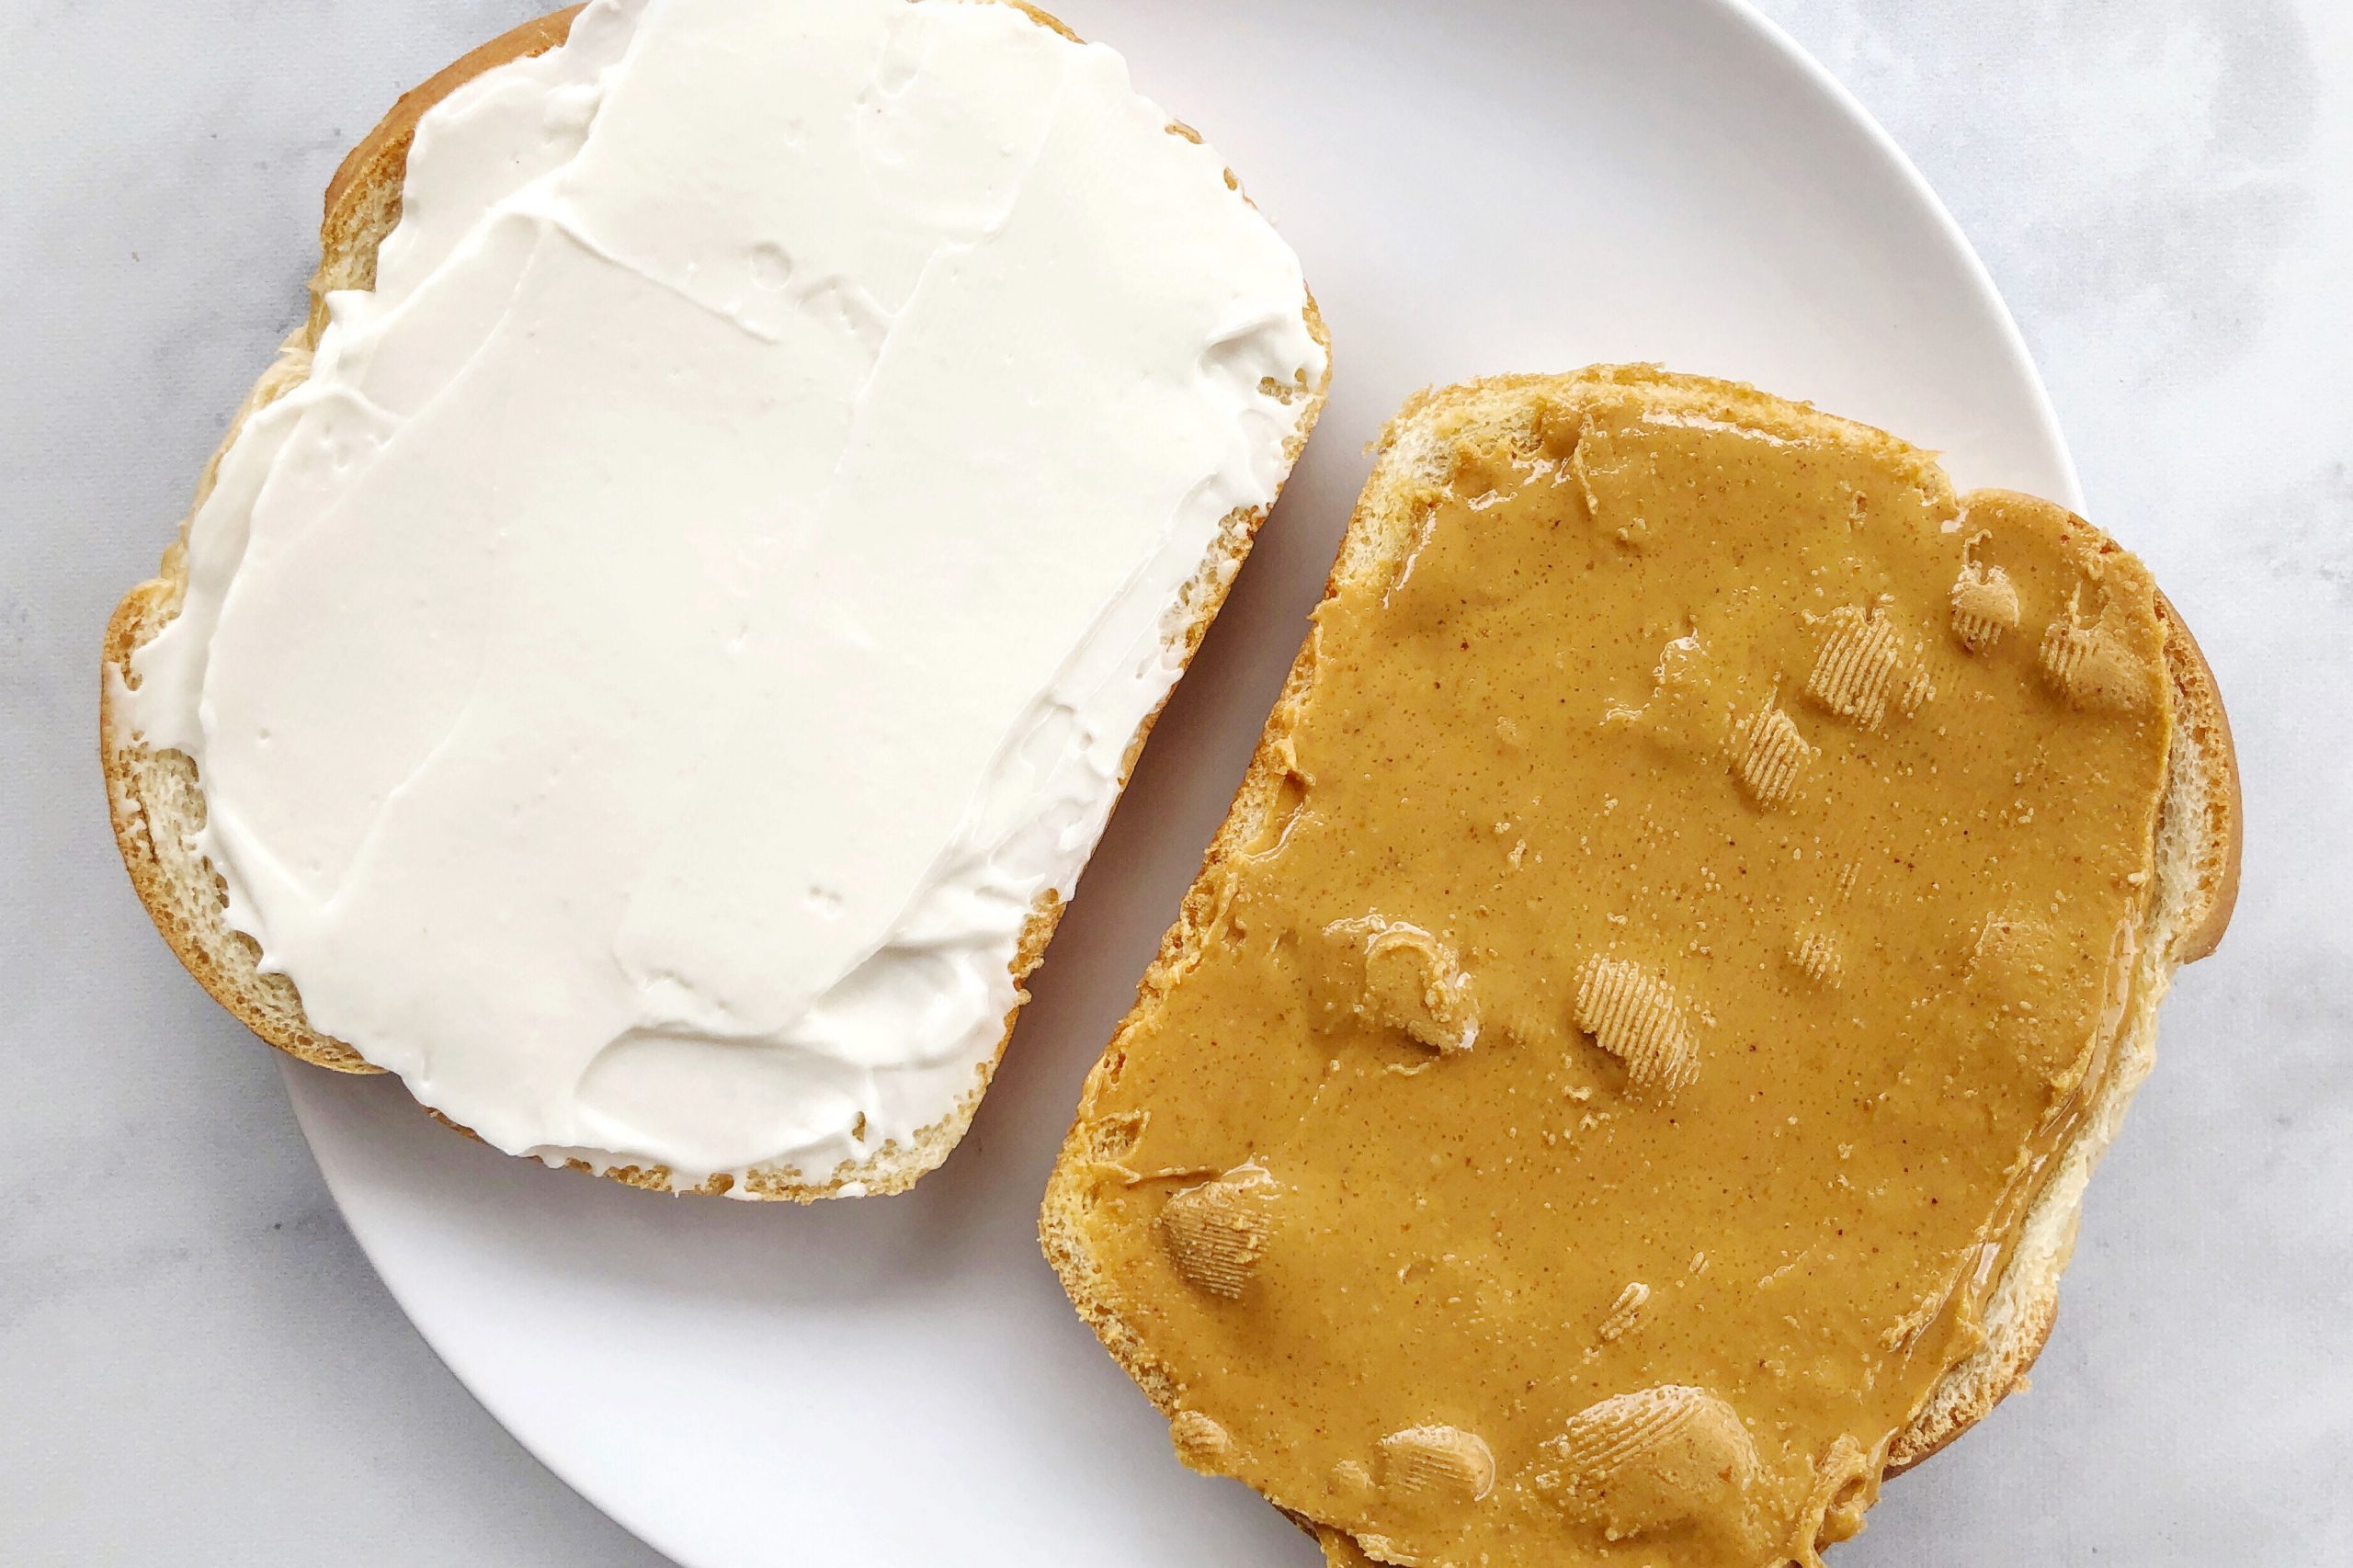 Peanut Butter And Mayo How To Make This Iconic Southern Sandwich